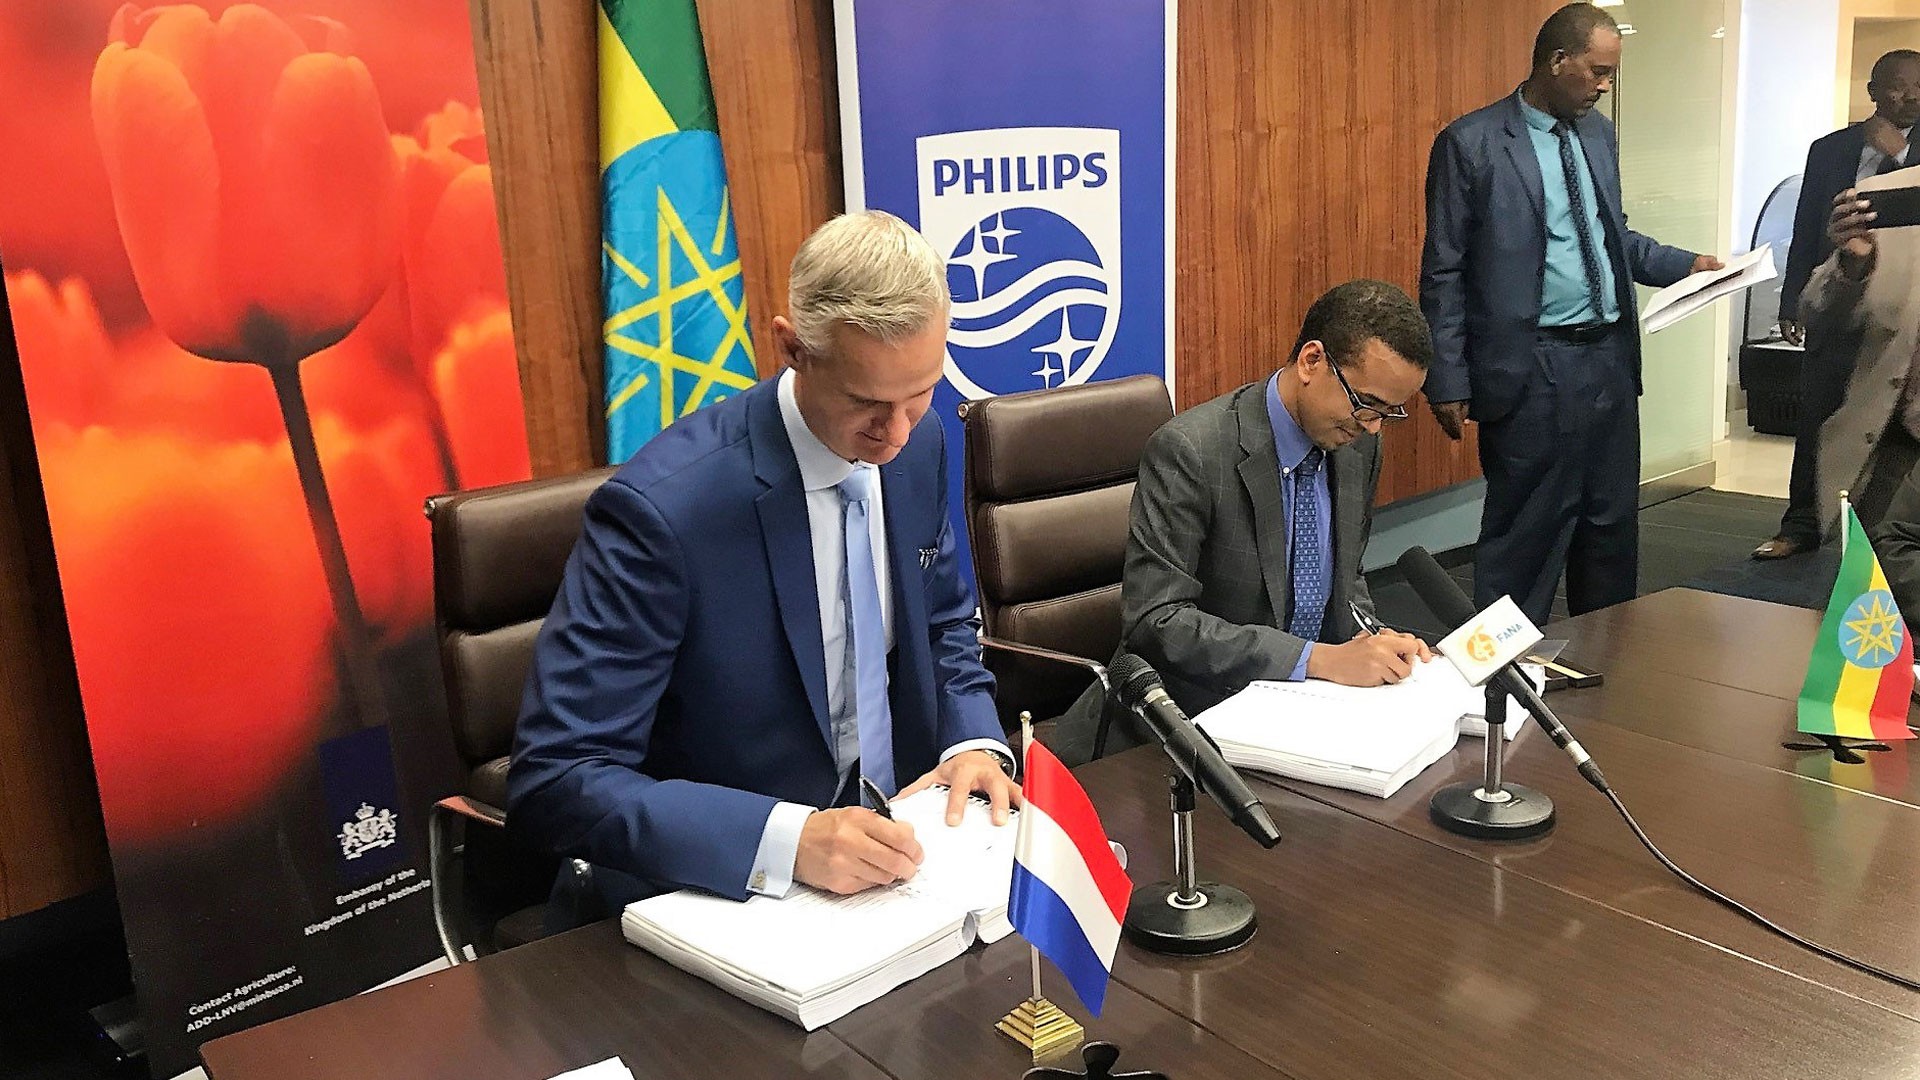 Philips and the governments of Ethiopia and the Netherlands sign seven-year agreement to build Ethiopia’s first specialized Cardiac Care Center